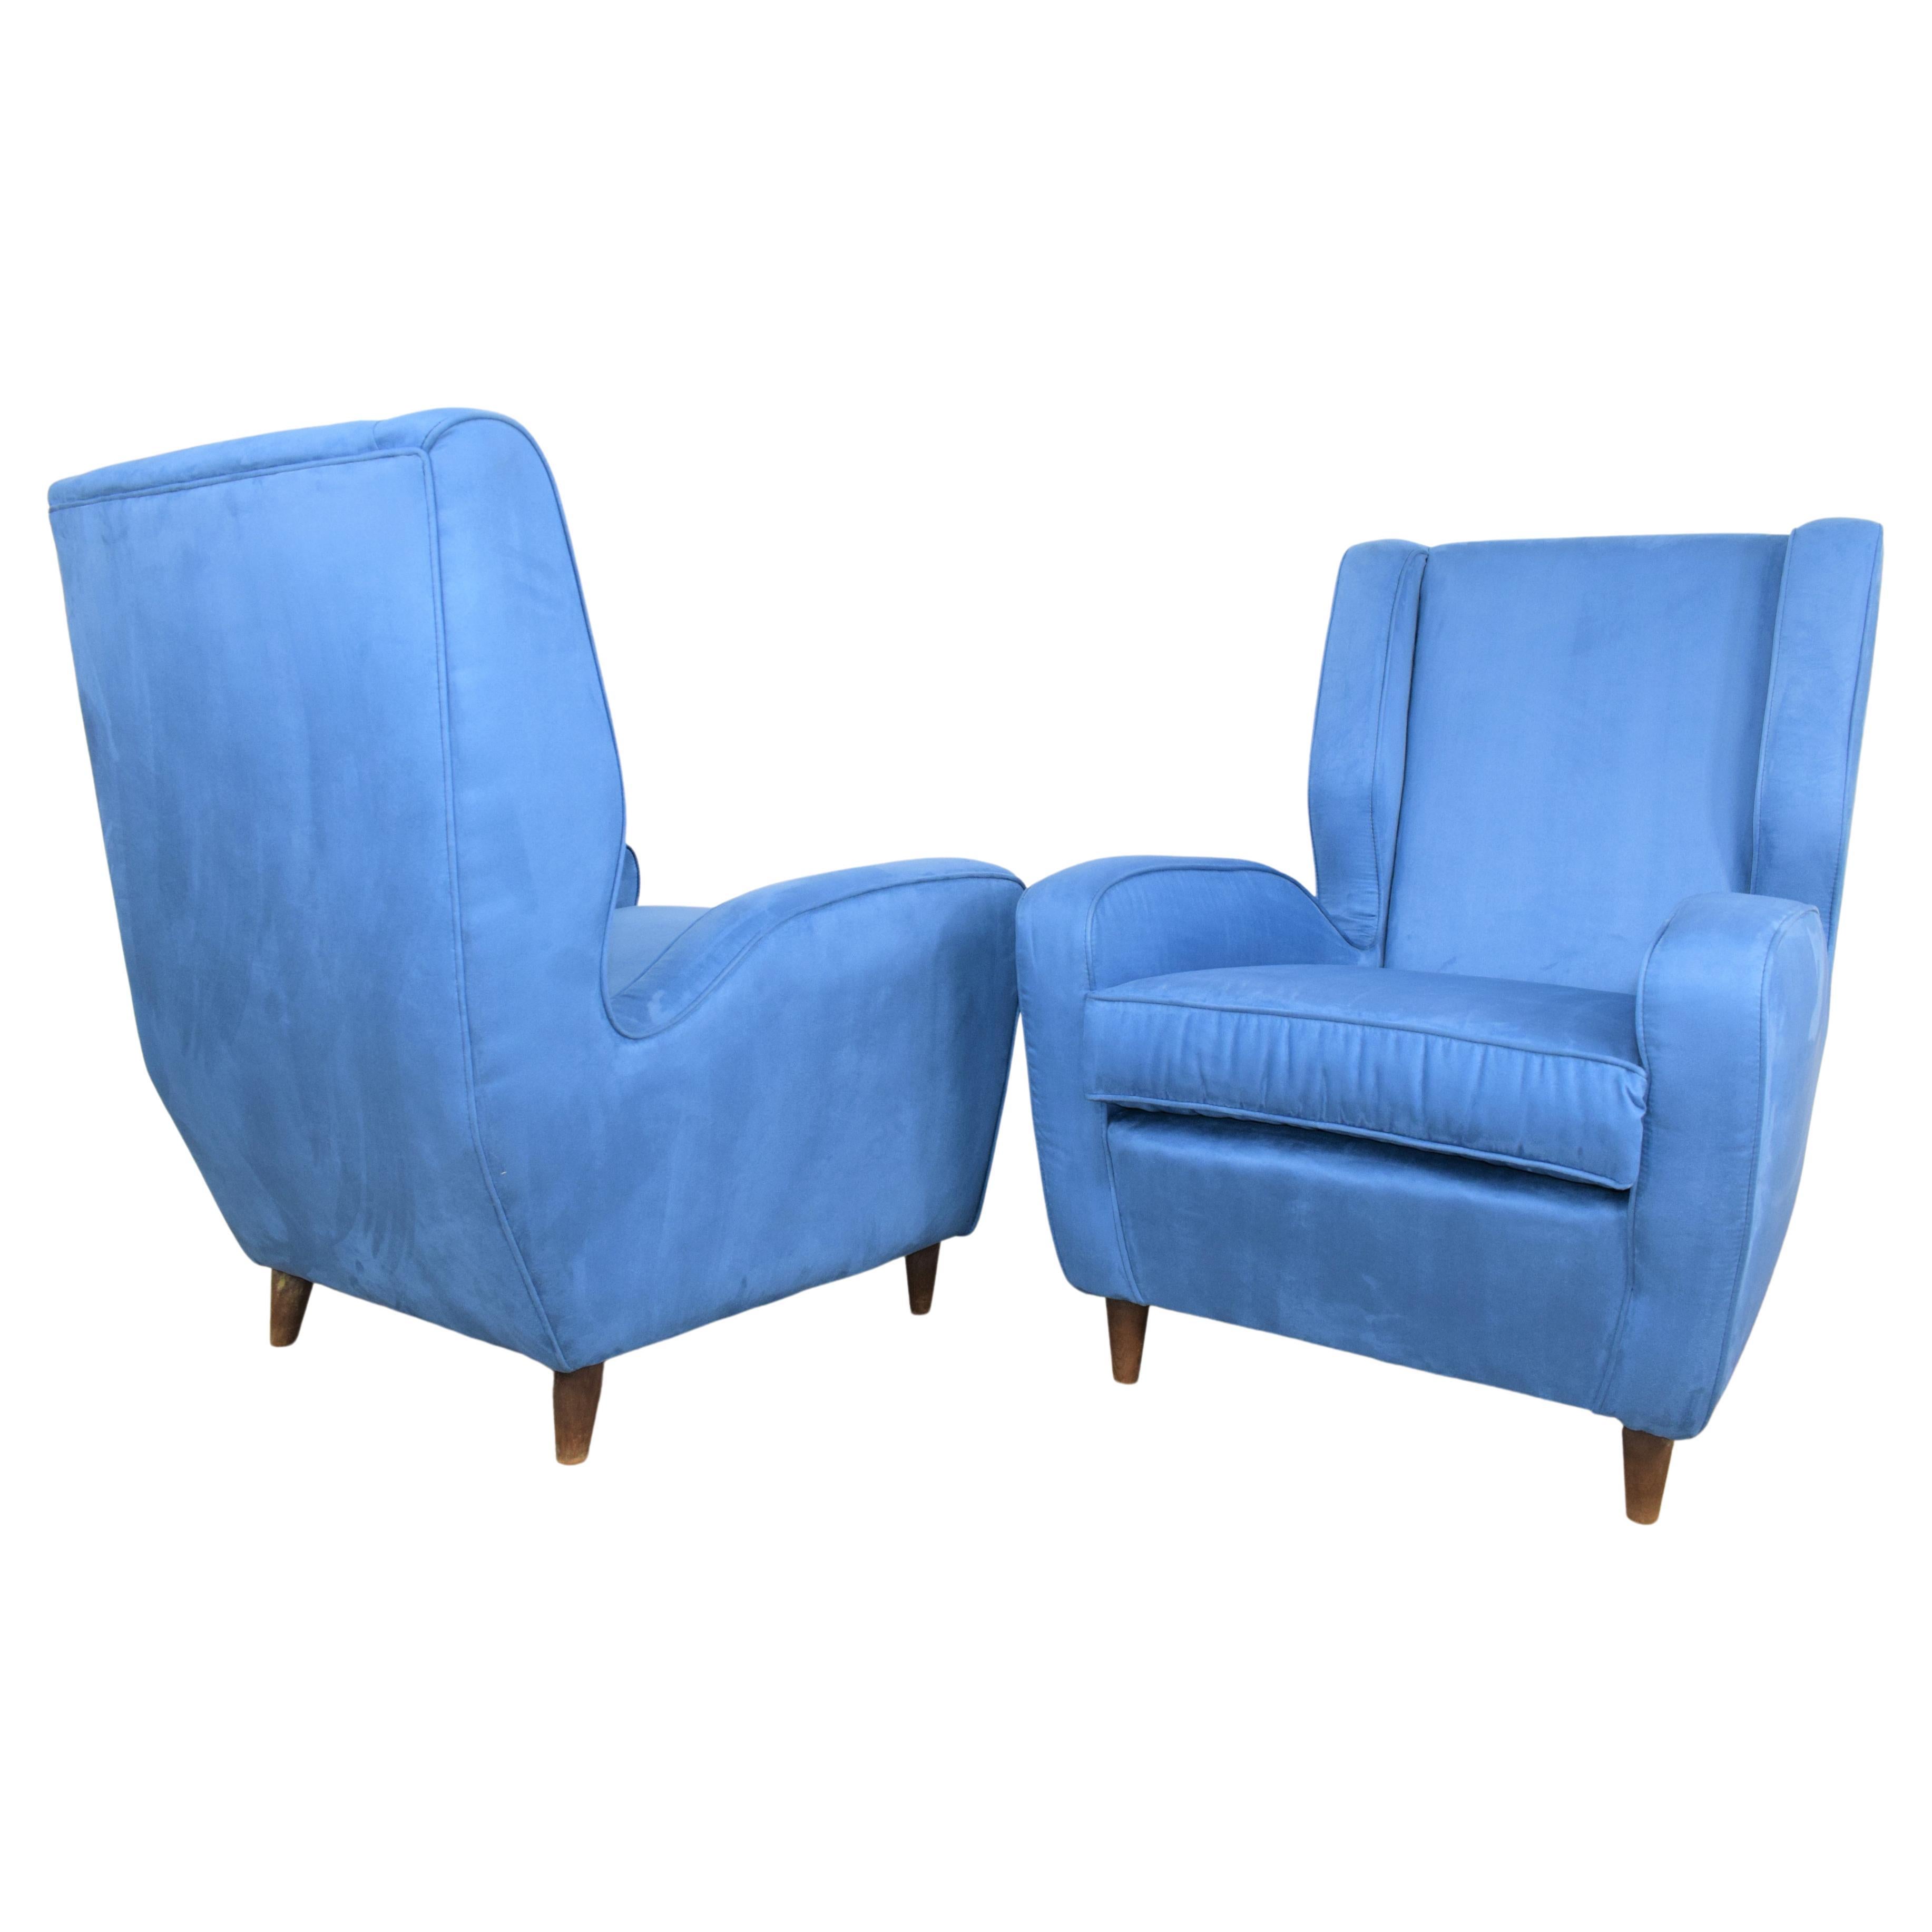 Pair of Armchairs, Melchiorre Bega Style, 1950s